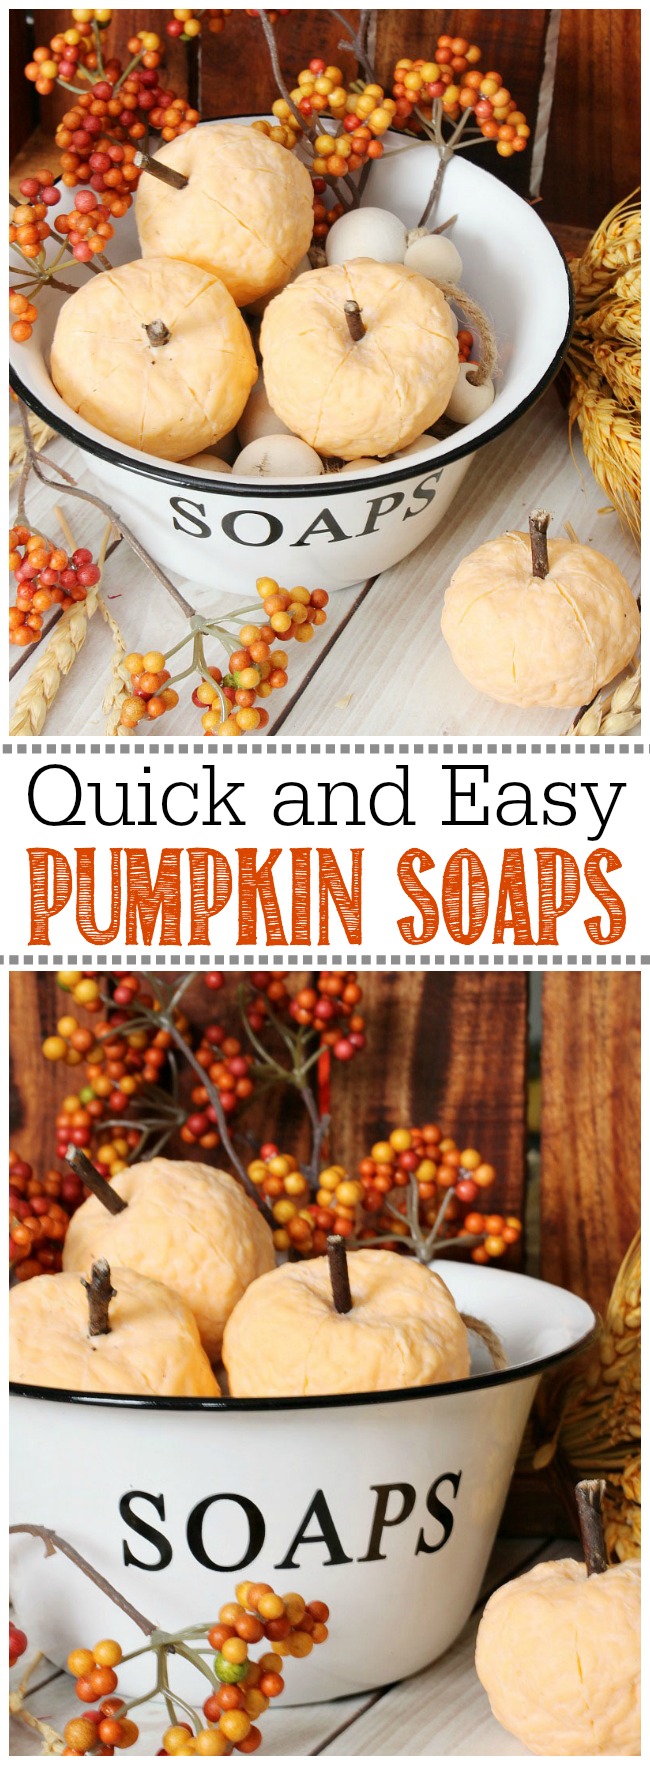 These quick and easy DIY pumpkin soaps are so cute and the perfect addition to your fall decor. They work great as cute little hostess gifts too! #falldecor #pumpkin